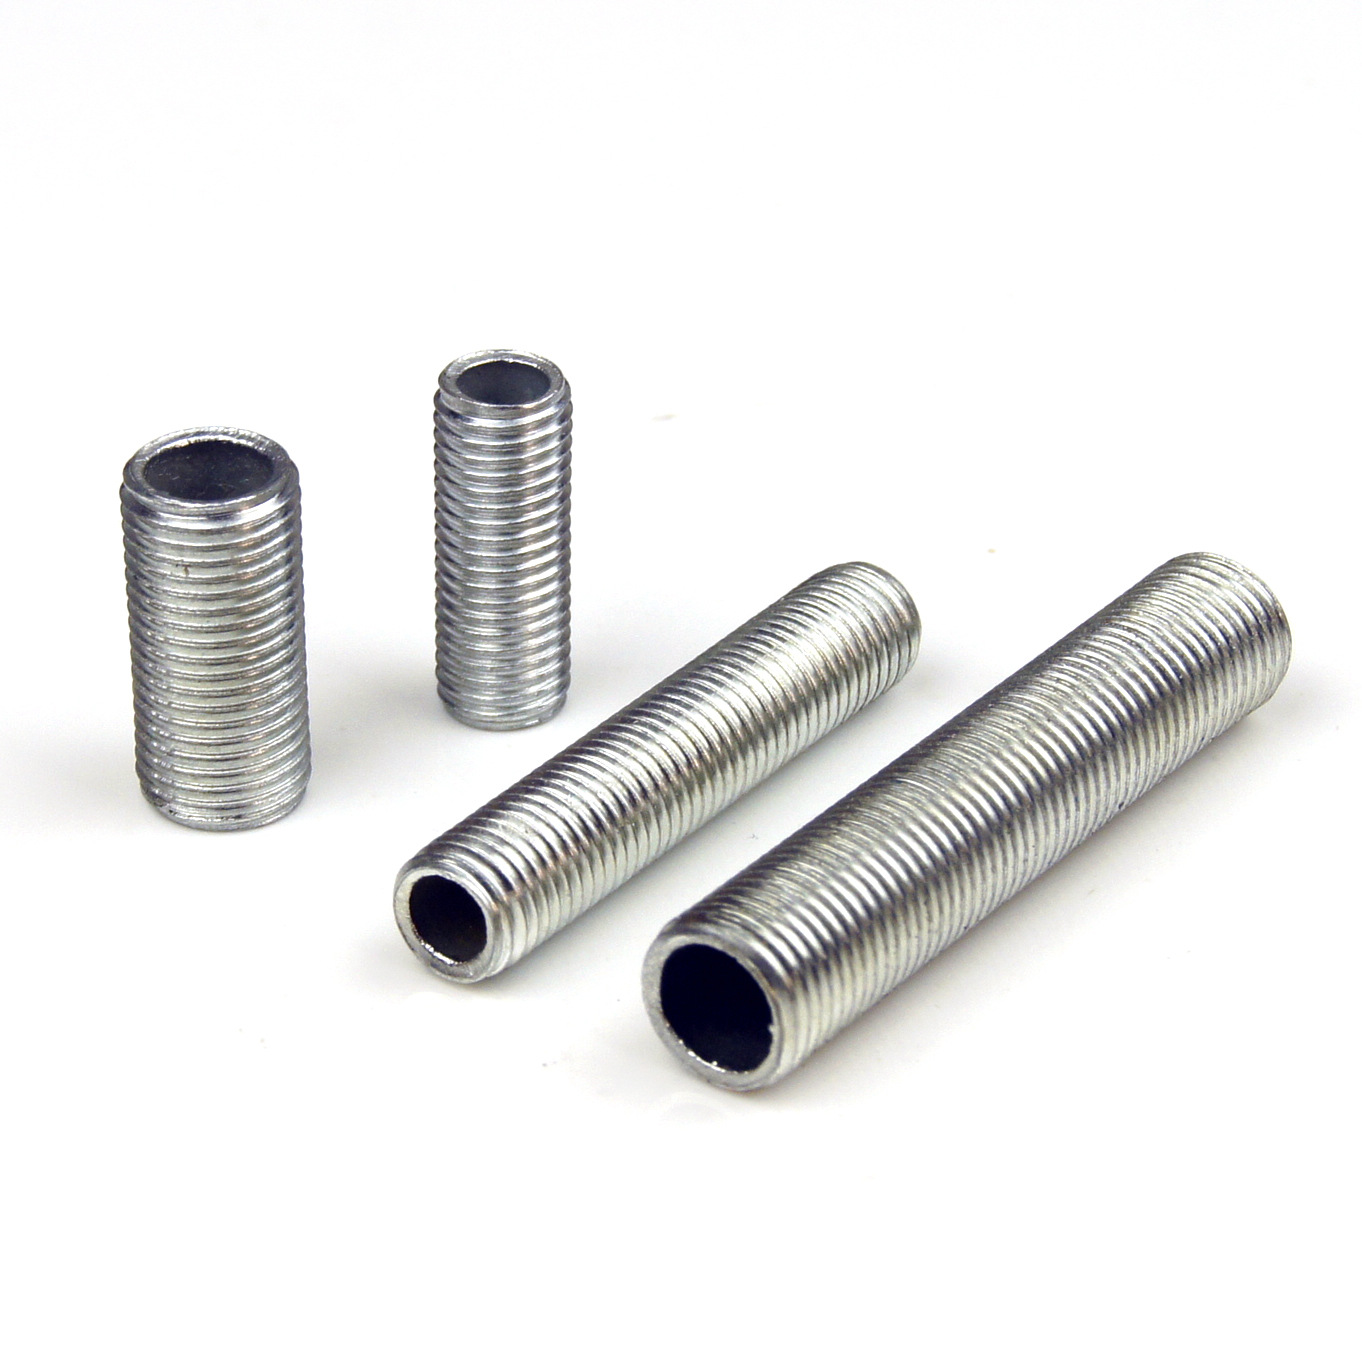 hvac-mep-products-hollow-threaded-rod-manufacturer